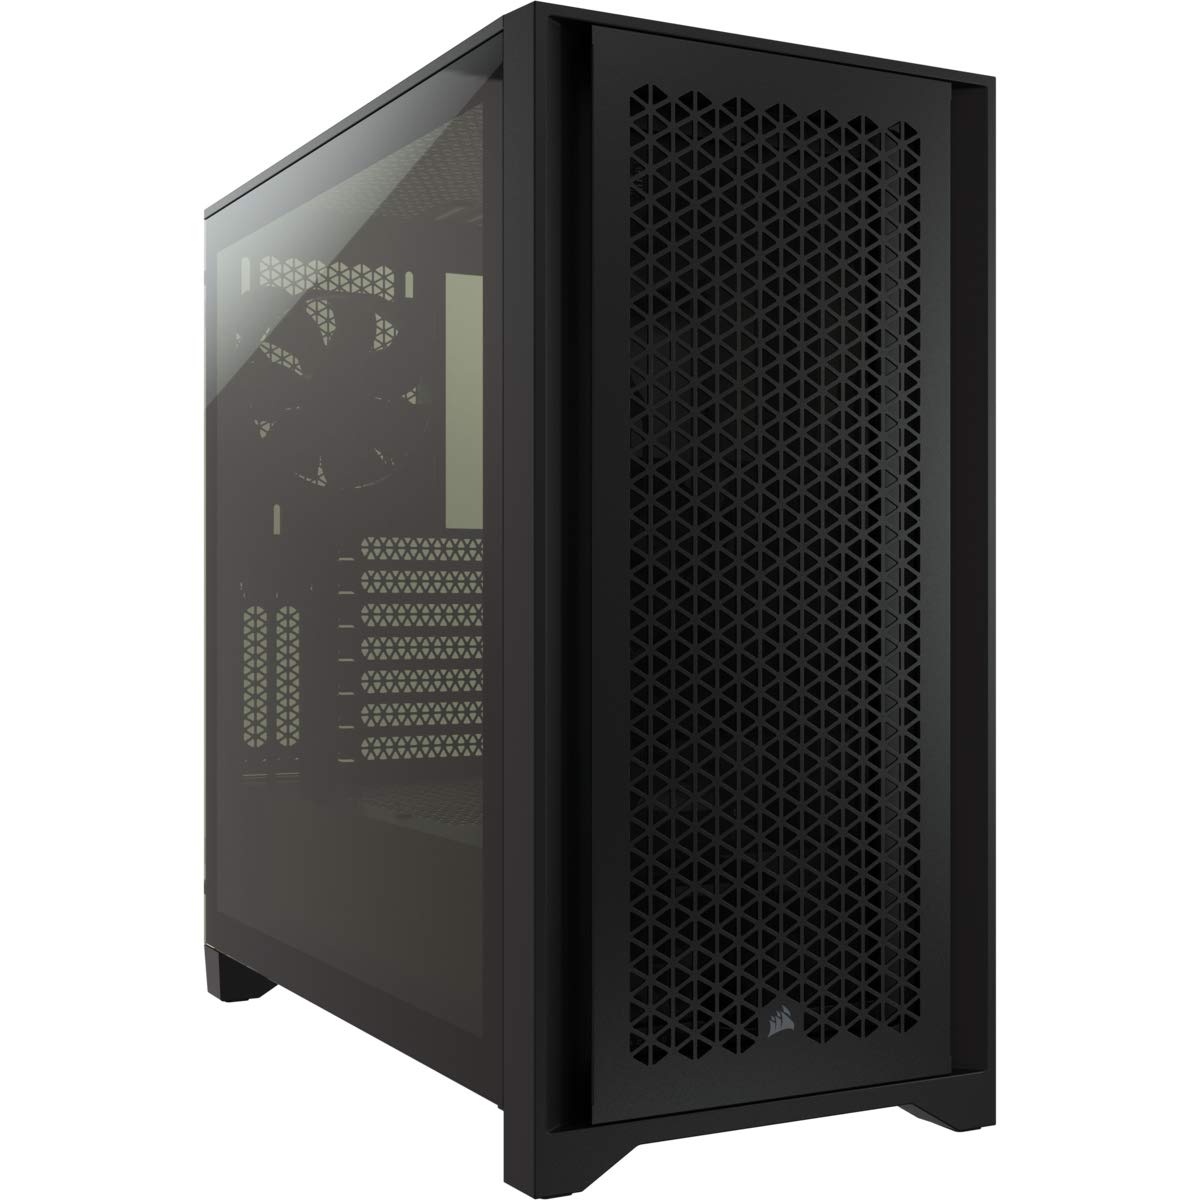 CORSAIR 4000D AIRFLOW Tempered Glass Mid-Tower ATX Case, Black or White from multiple retailers $79.99 + Free Shipping